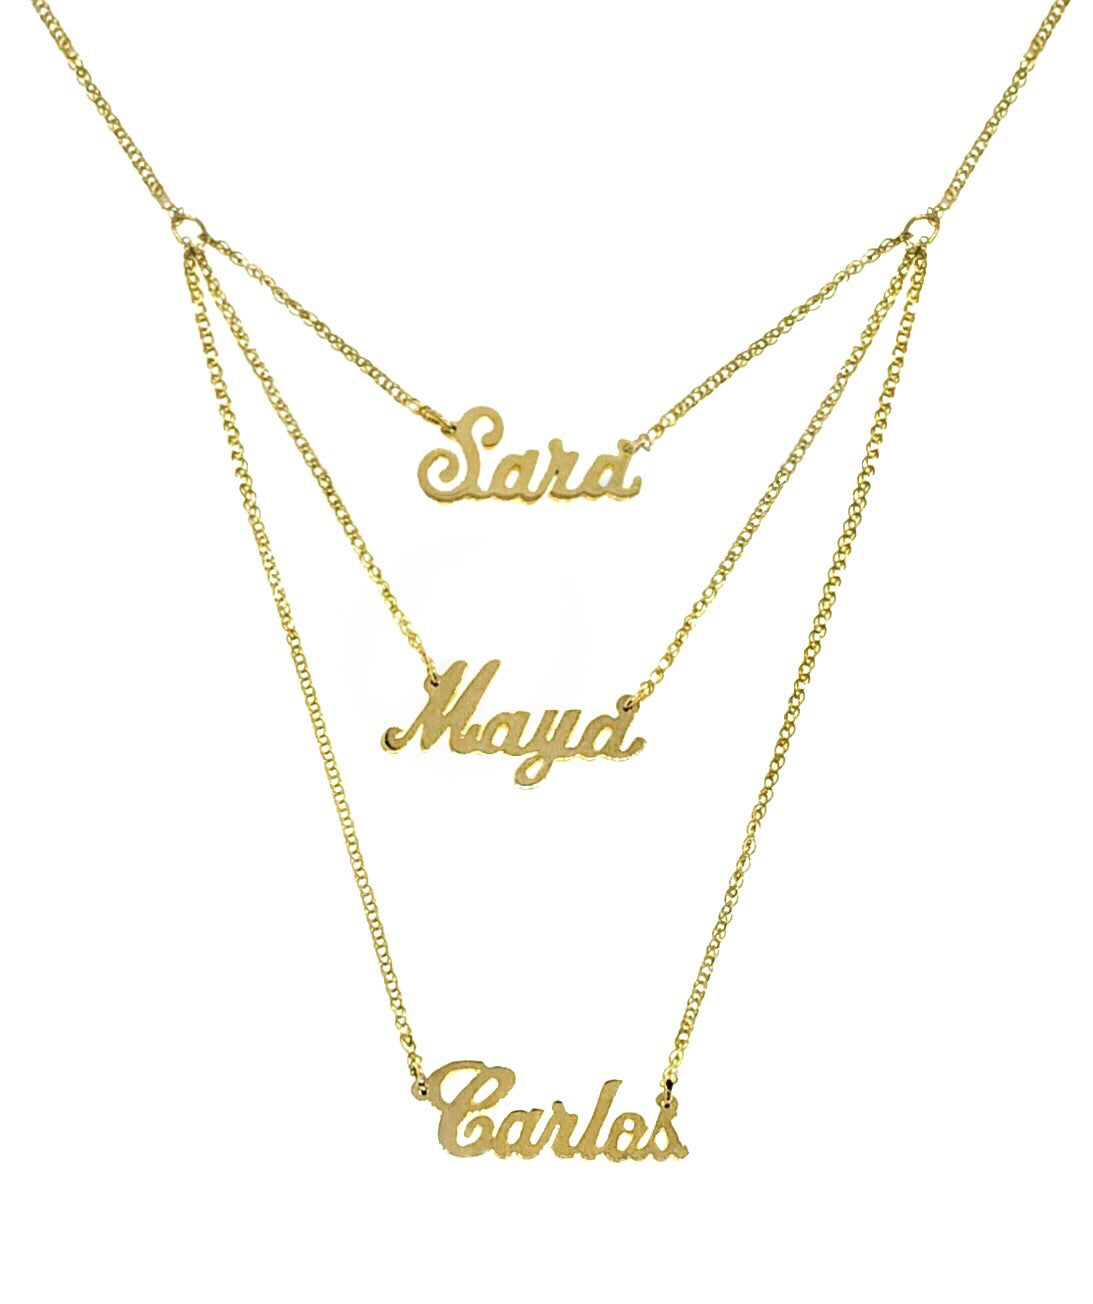 14K YELLOW GOLD SCRIPT TRIPLE TIERED NAME NECKLACE